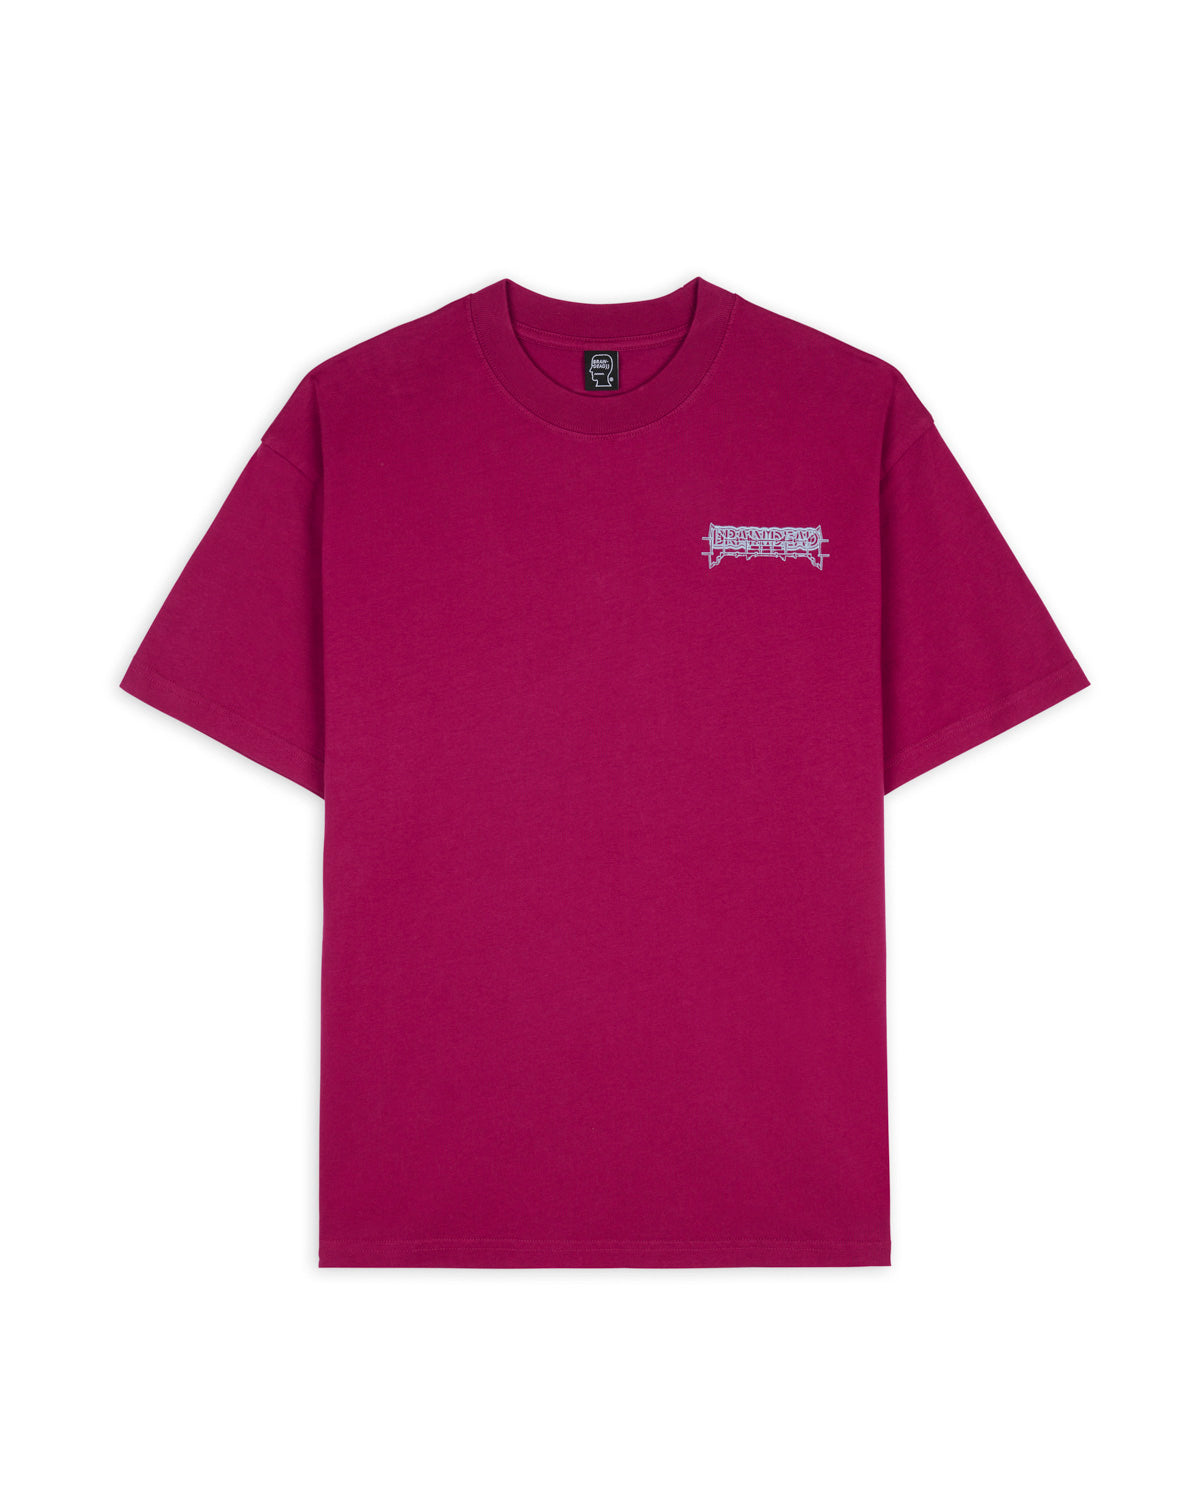 Helicopter T-Shirt - Maroon 1